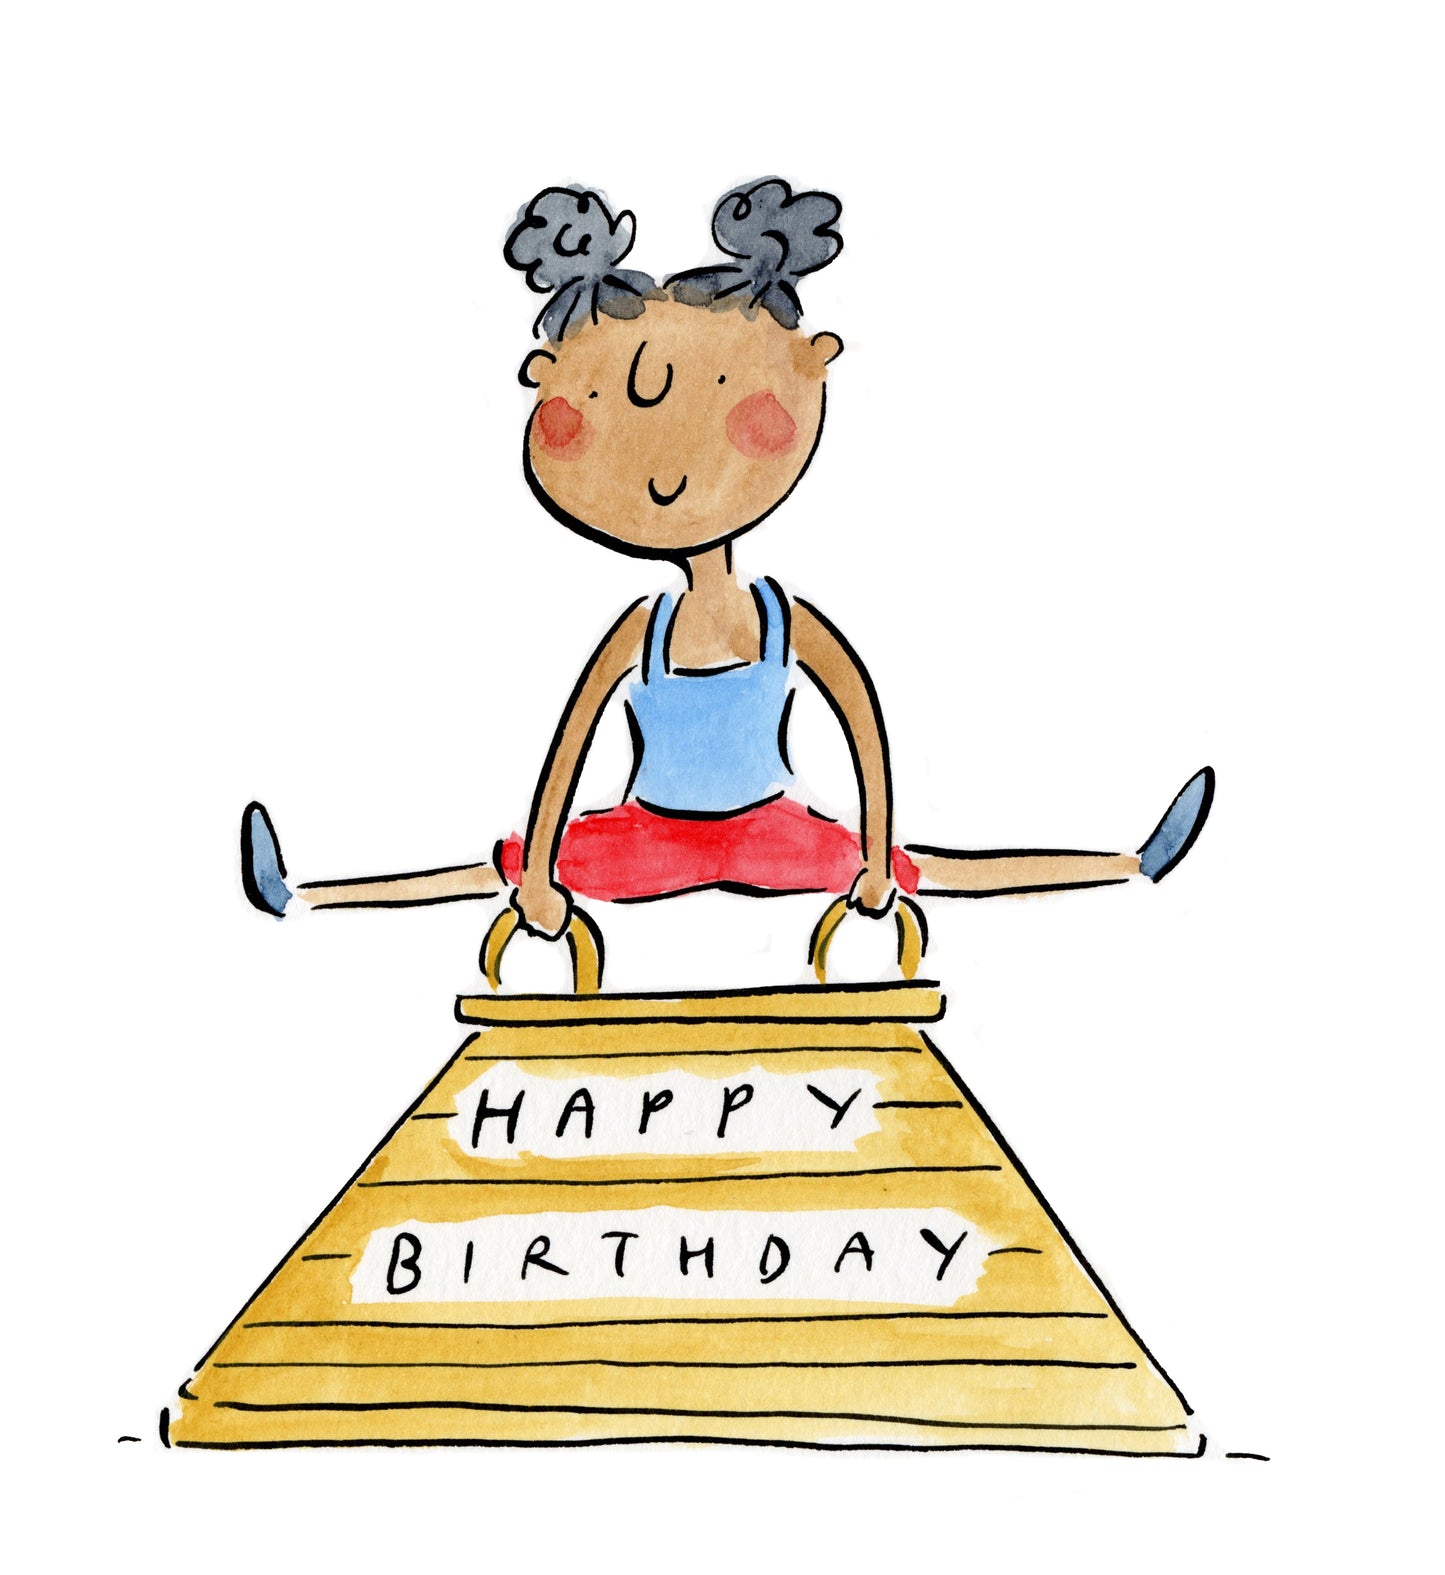 Happy Birthday original pen and ink and watercolour illustration by Rosie Brooks